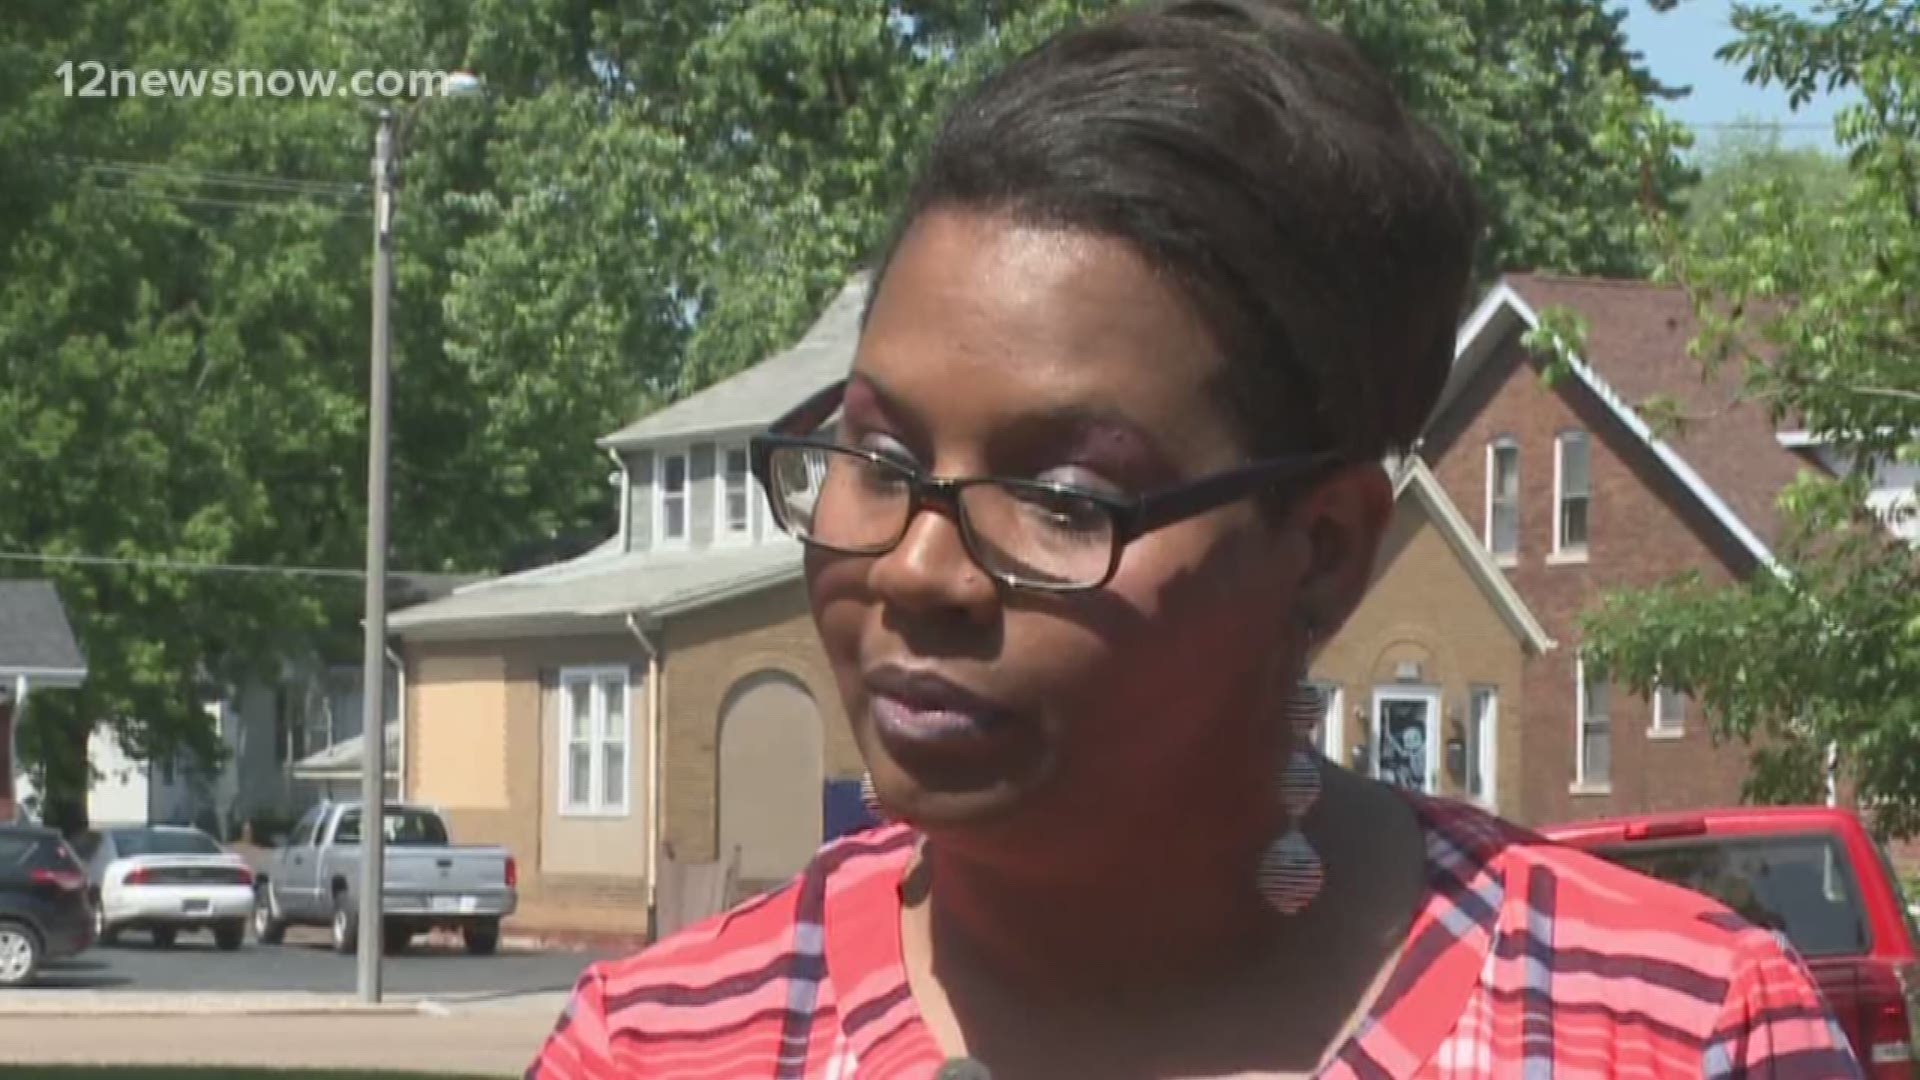 Missouri mom calls police on son after her gun goes missing from their home.